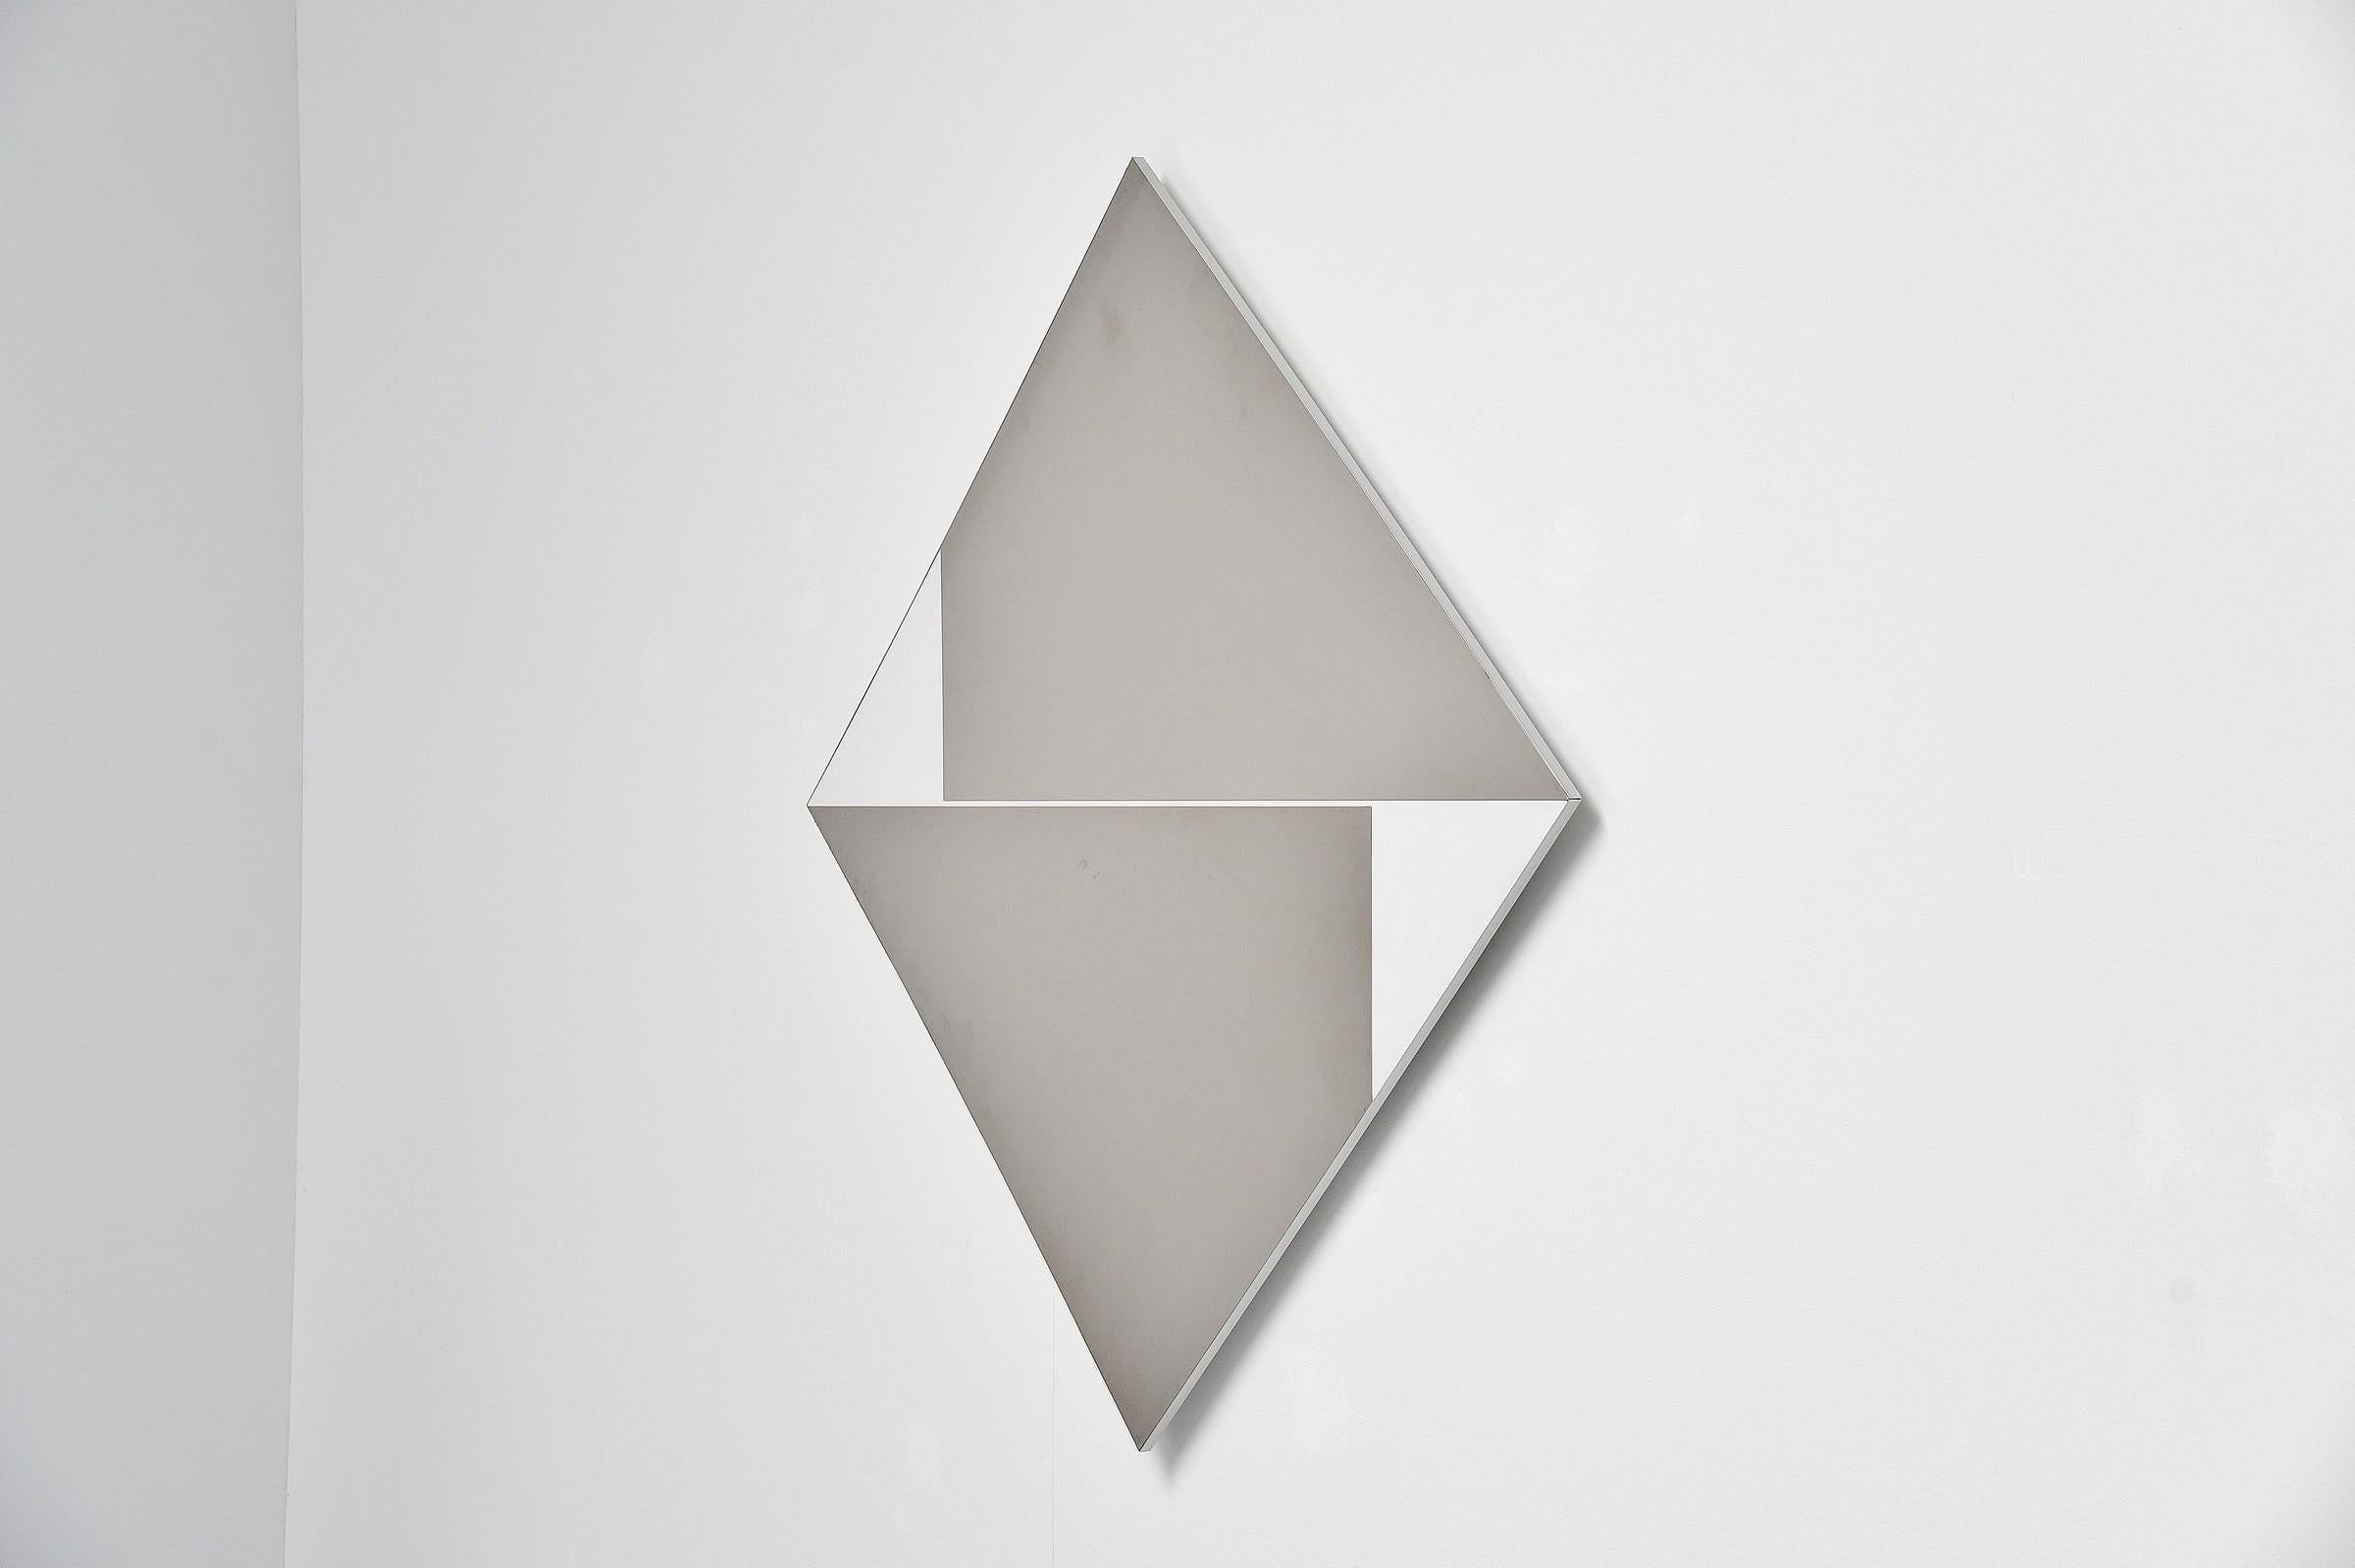 Stunning abstract modern triangle shaped stainless steel wall artwork designed by Rudolf Wolf and manufactured in his own atelier in 1972. This wall panel is made of white laminated board and has stainless steel abstract shapes on it. This artwork